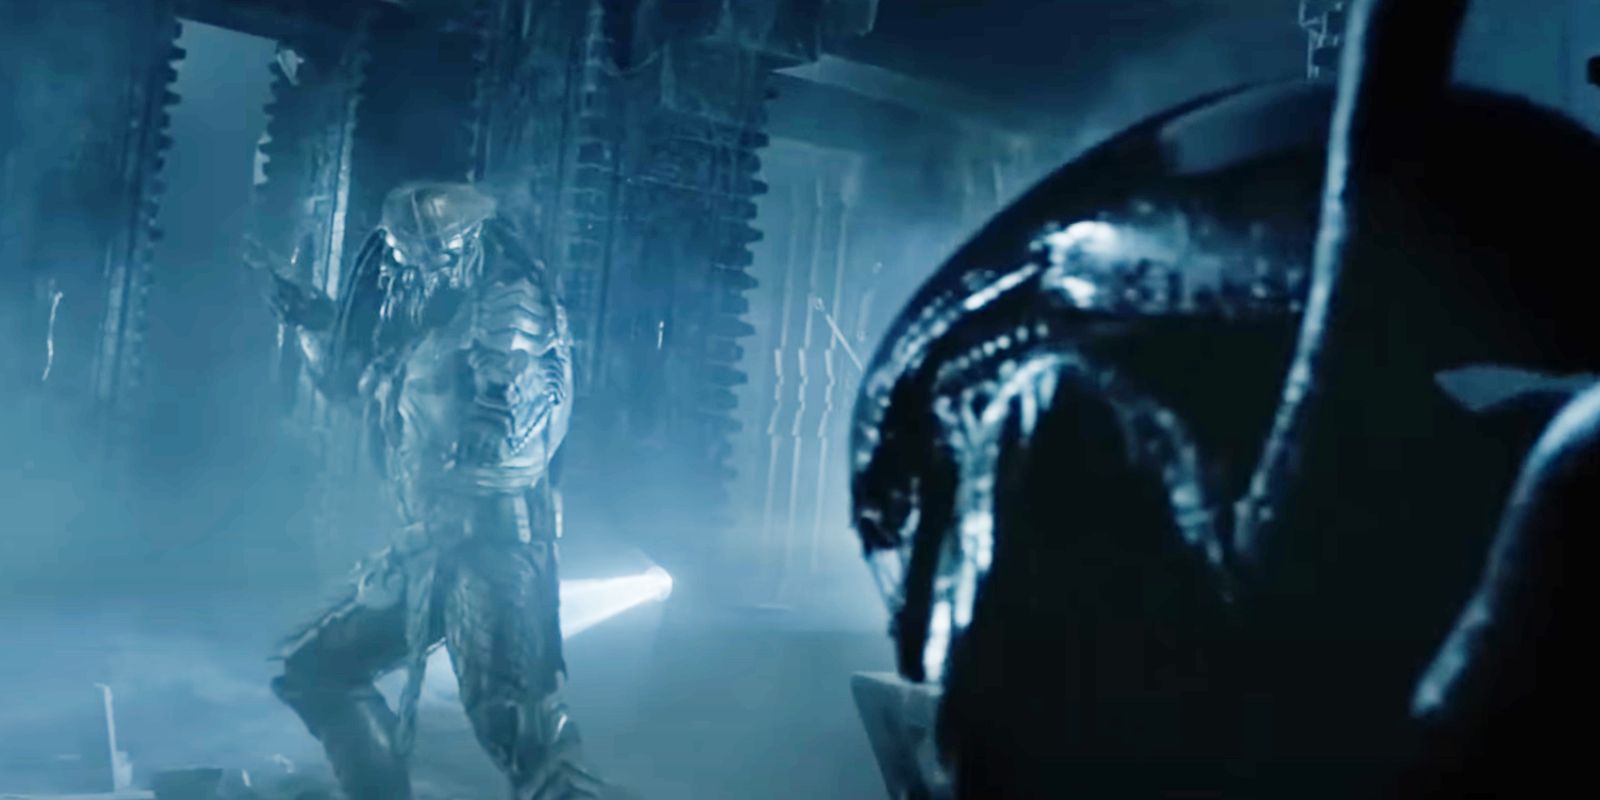 Disney’s Cancelled Alien Vs. Predator Would’ve Fixed The Franchise After 2 Awful Movies